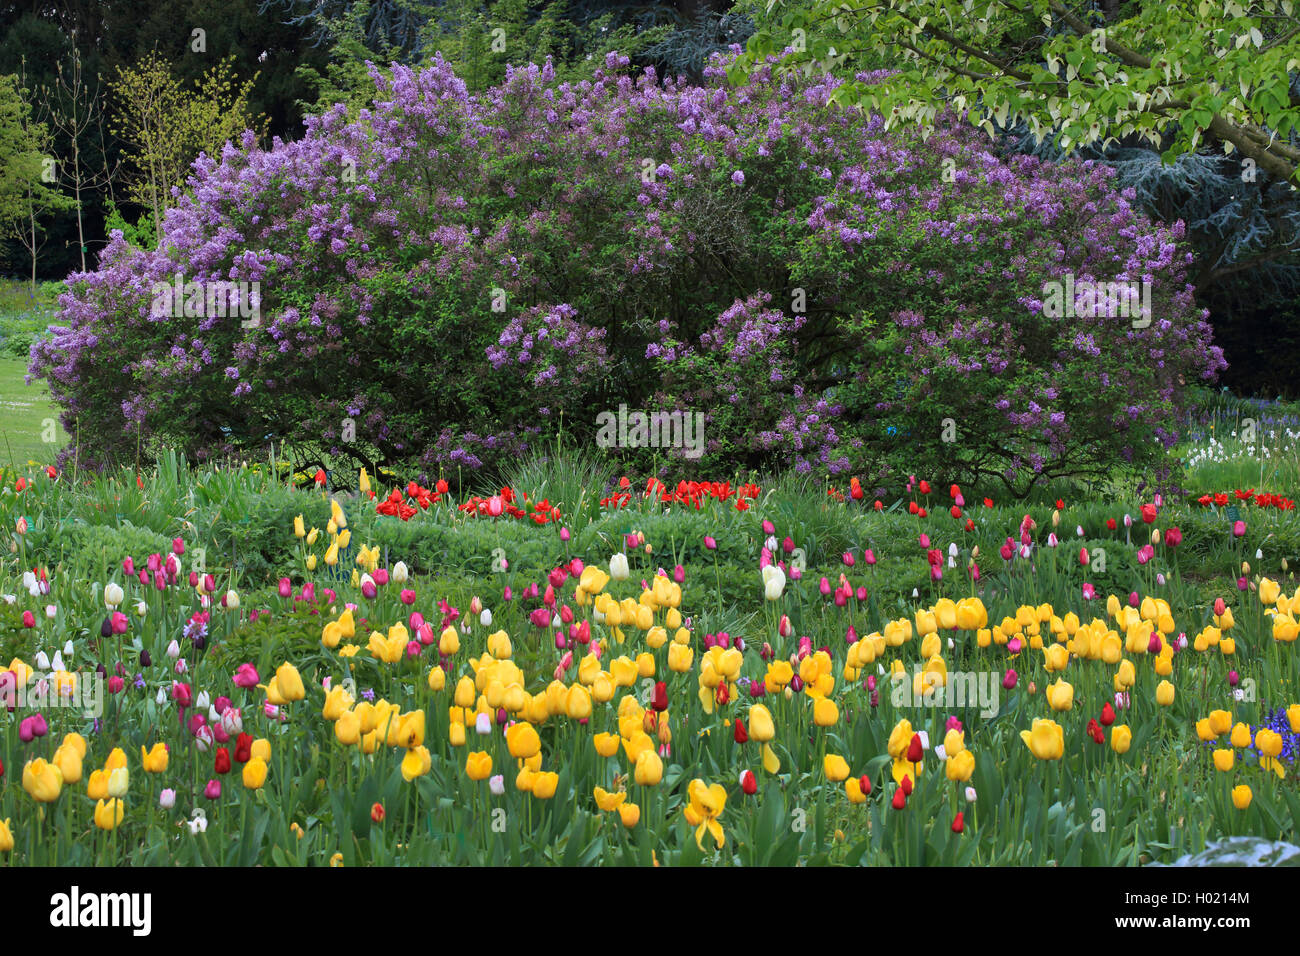 common lilac (Syringa vulgaris), lilac and tulips in garden, Germany Stock Photo